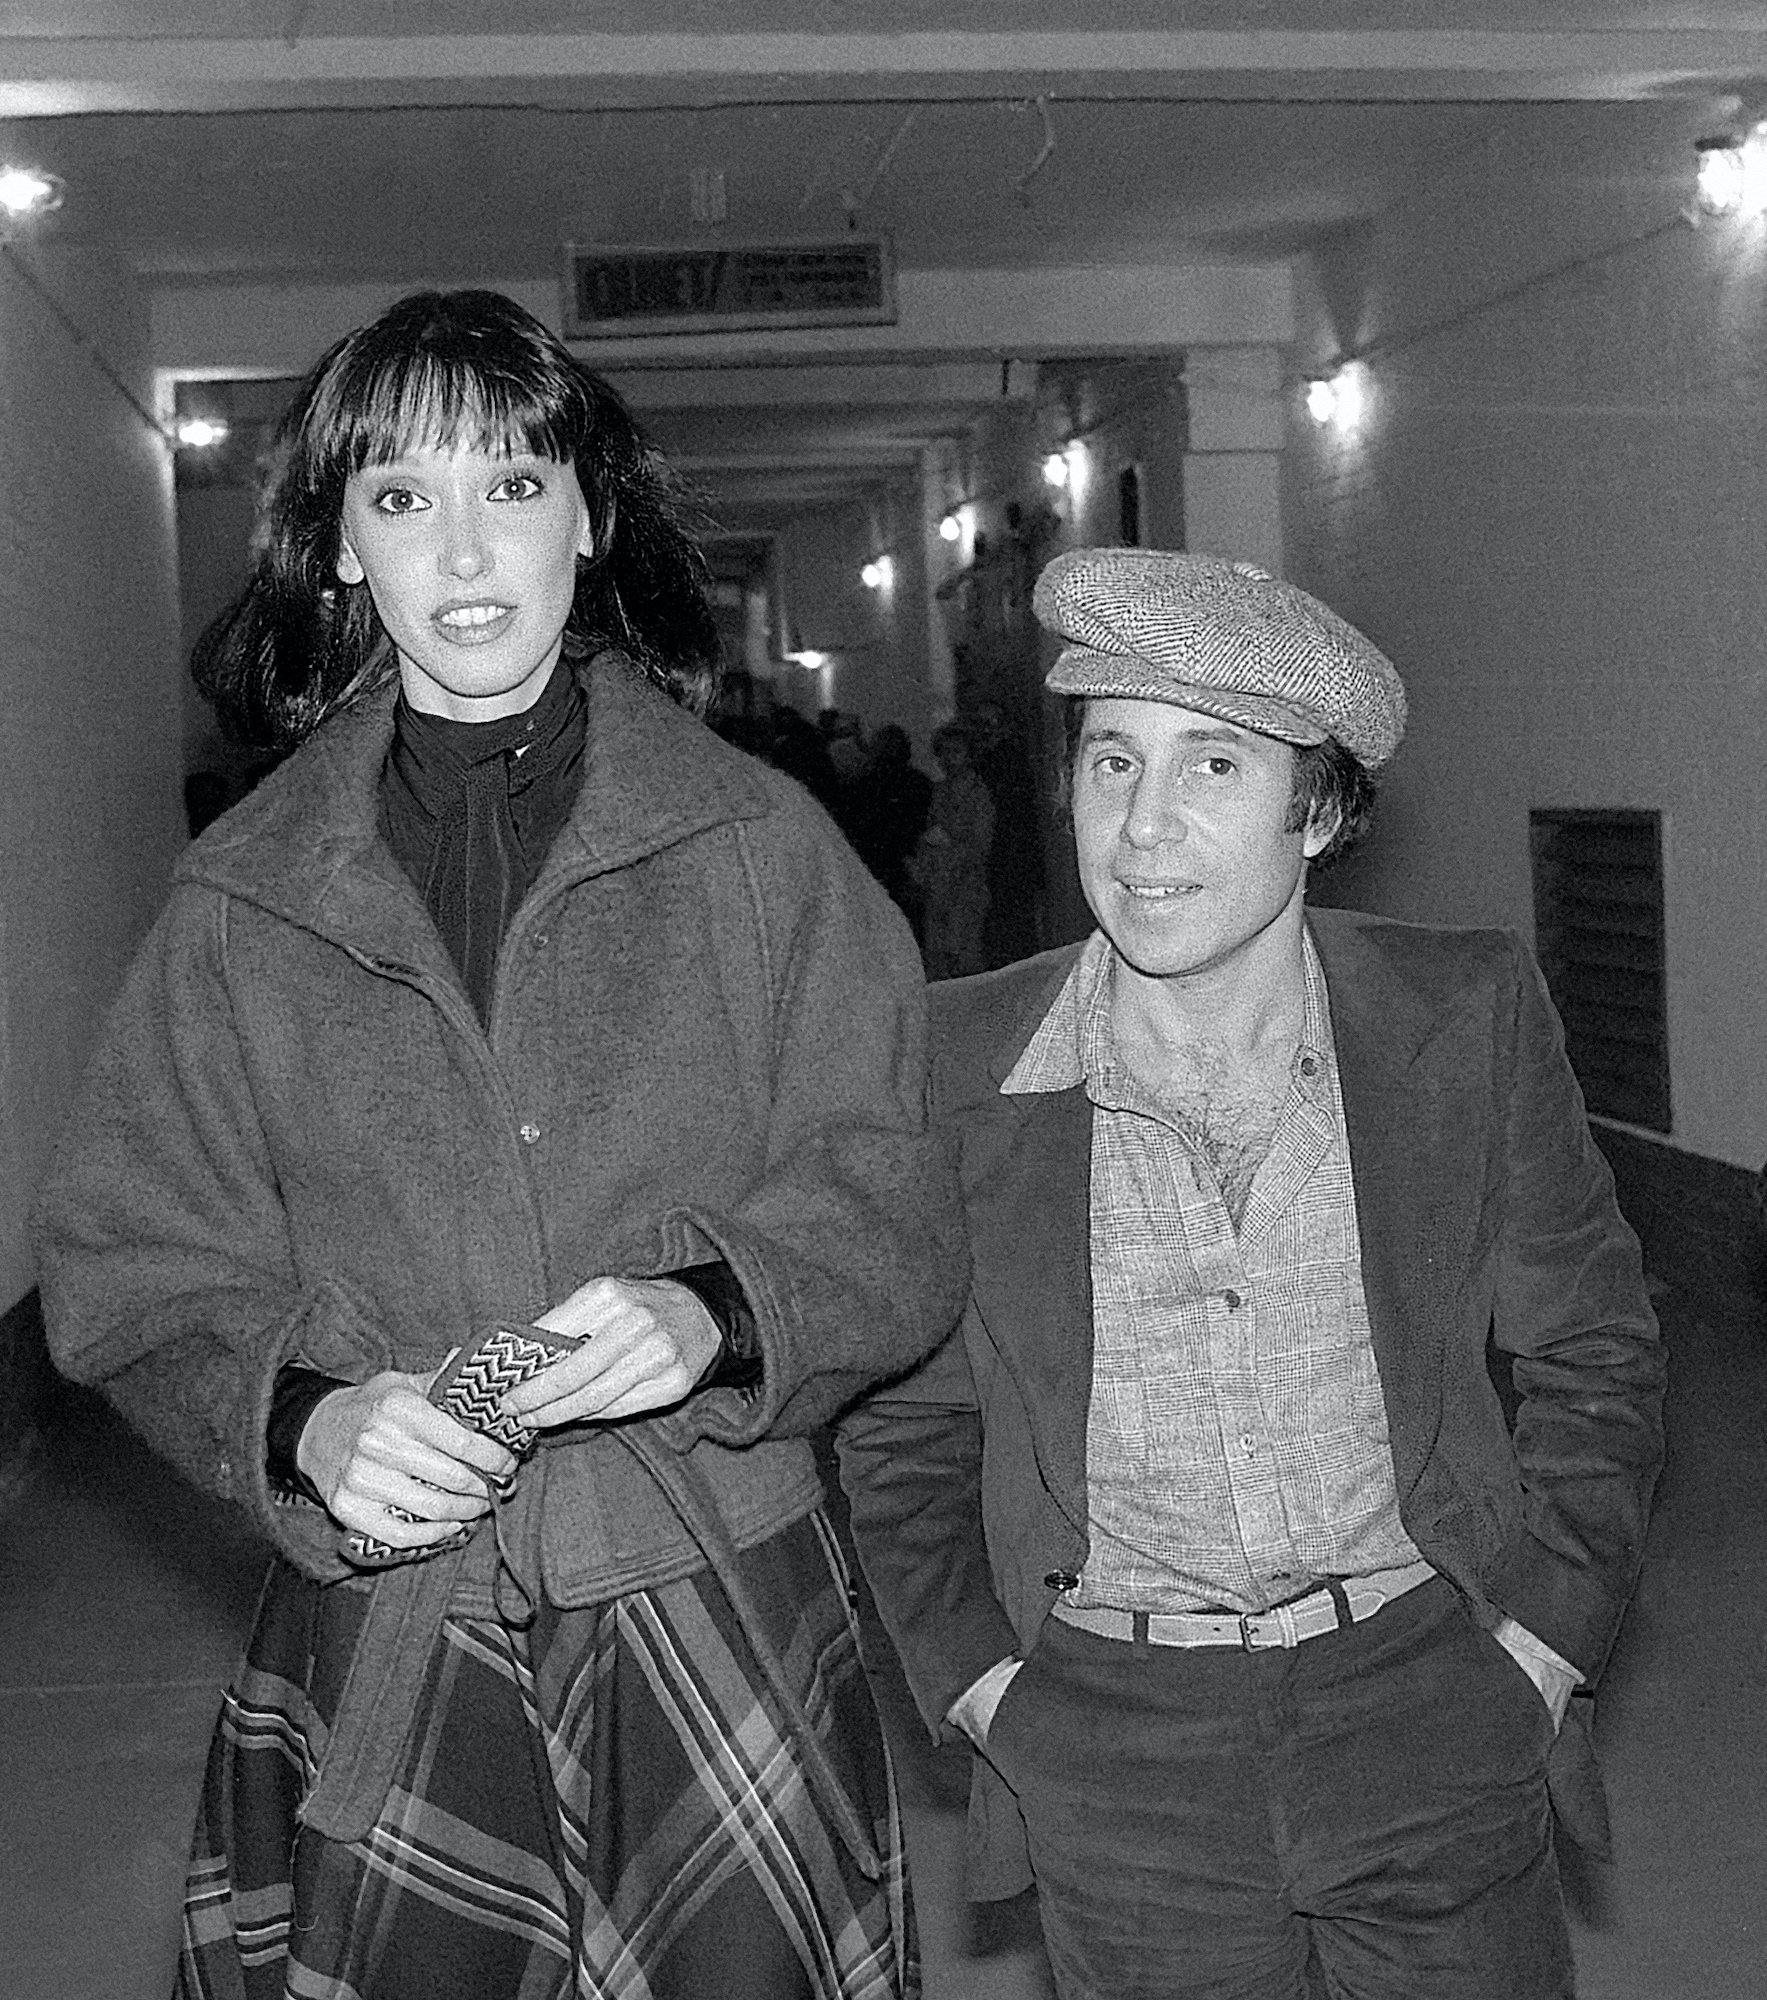 (L-R) Shelley Duvall and Paul Simon, walking down a hall, in black and white